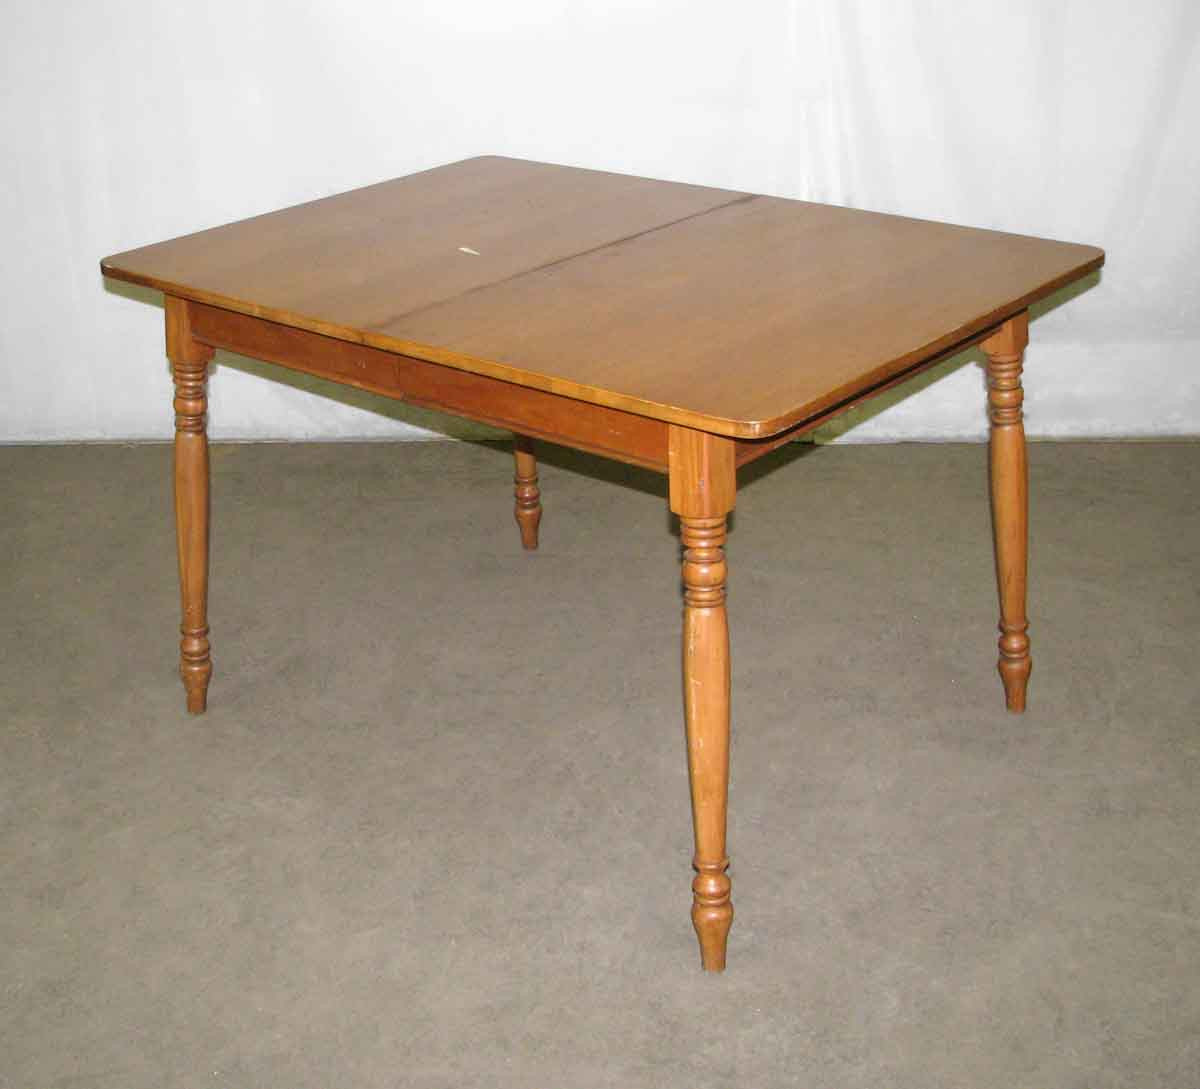 Small Wood Kitchen Table
 Extendable Small Wooden Dining Table